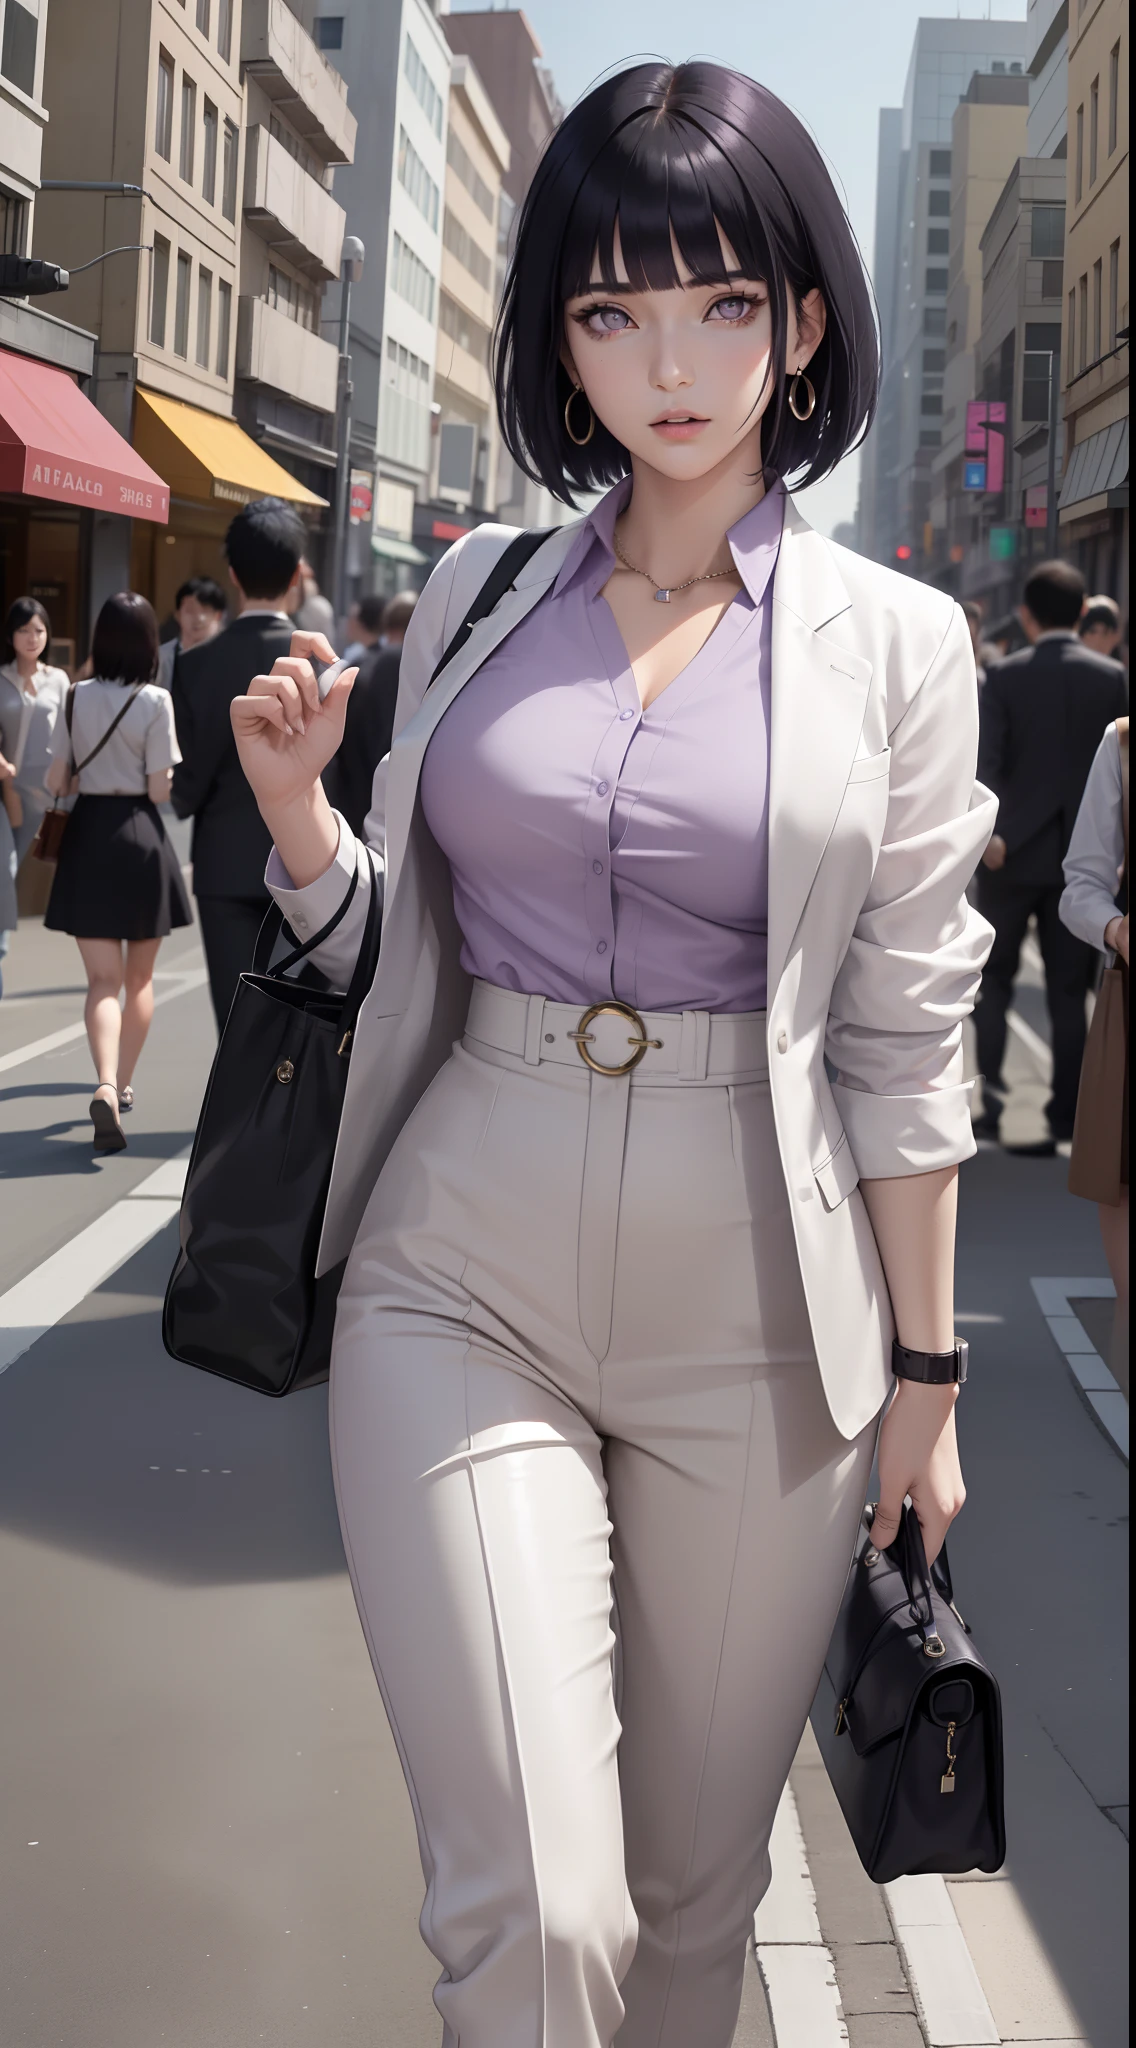 hinata from anime naruto, black hair, short hair, bangs, light purple eyes, wearing mascara, perfect body, perfect breasts, beautiful woman, very beautiful, wearing a light purple formal shirt, dapper dress, formal attire, wearing a white blazer, mauve pants, wearing handbag, wearing watch, wearing earrings, being in the city, roadside, public space, Realism, masterpiece, textured leather, super detailed, high detailed, high quality, best quality, 1080P, HD, 16k